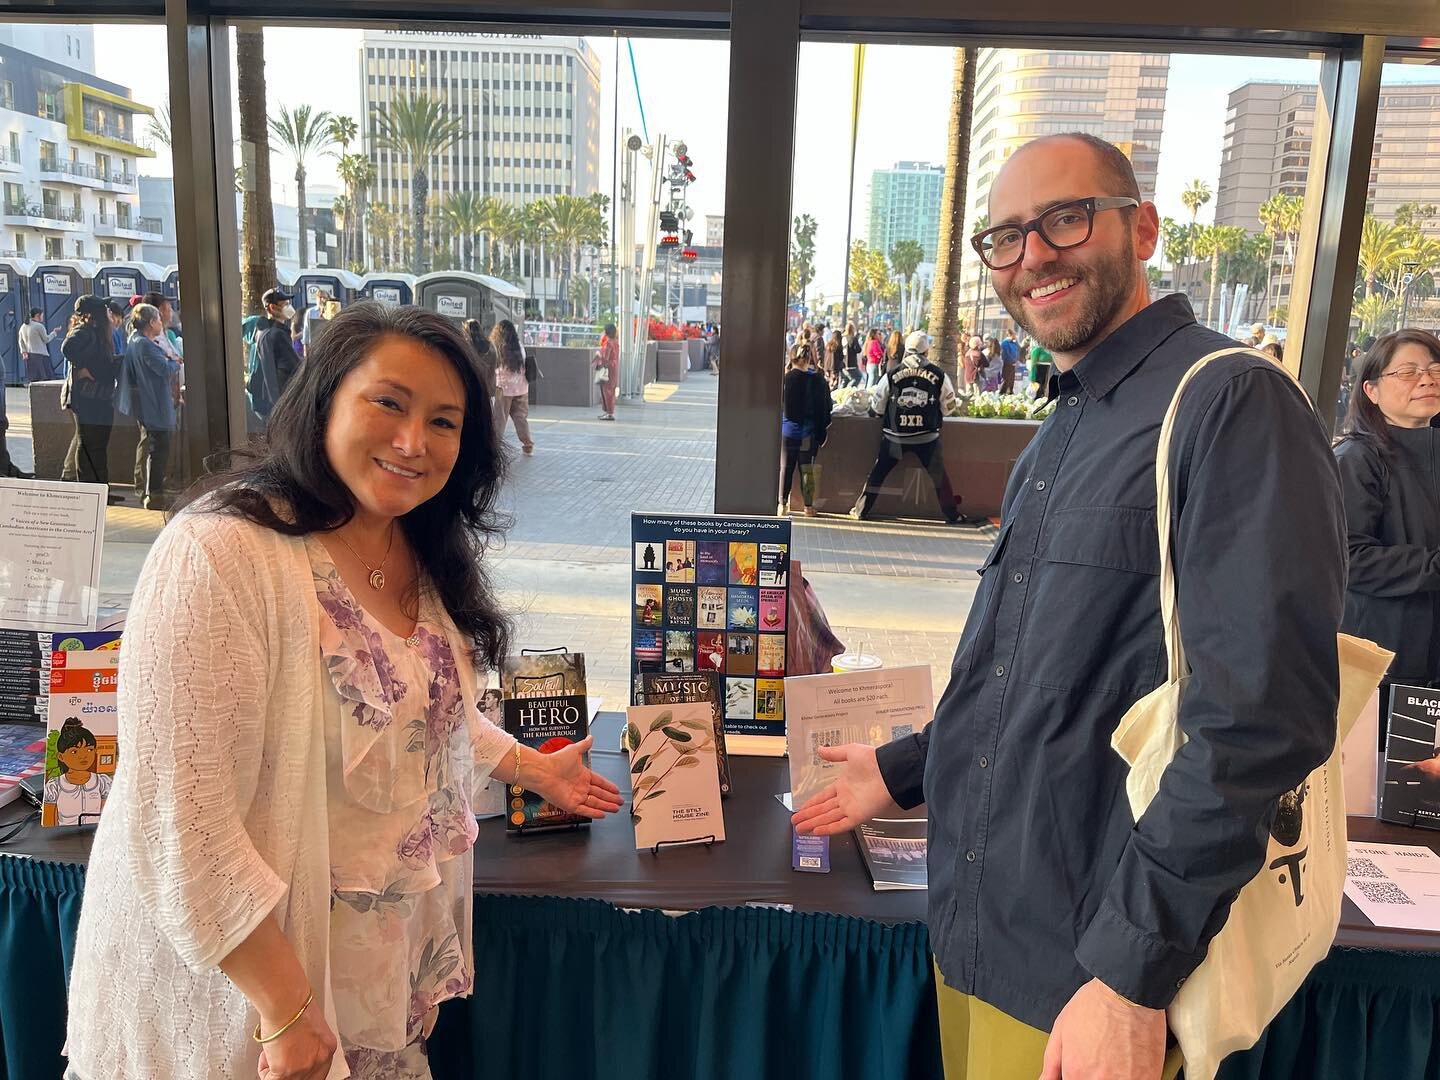 Happy Asian American Native Hawaiian Pacific Islander Heritage Month! 

Check out one of our favorite photos ❤️

@khmergenerations Christine Su and Brad DeMatteo at Khmeraspora in Long Beach, CA showcasing The Stilt House Zine Food and Identity Issue